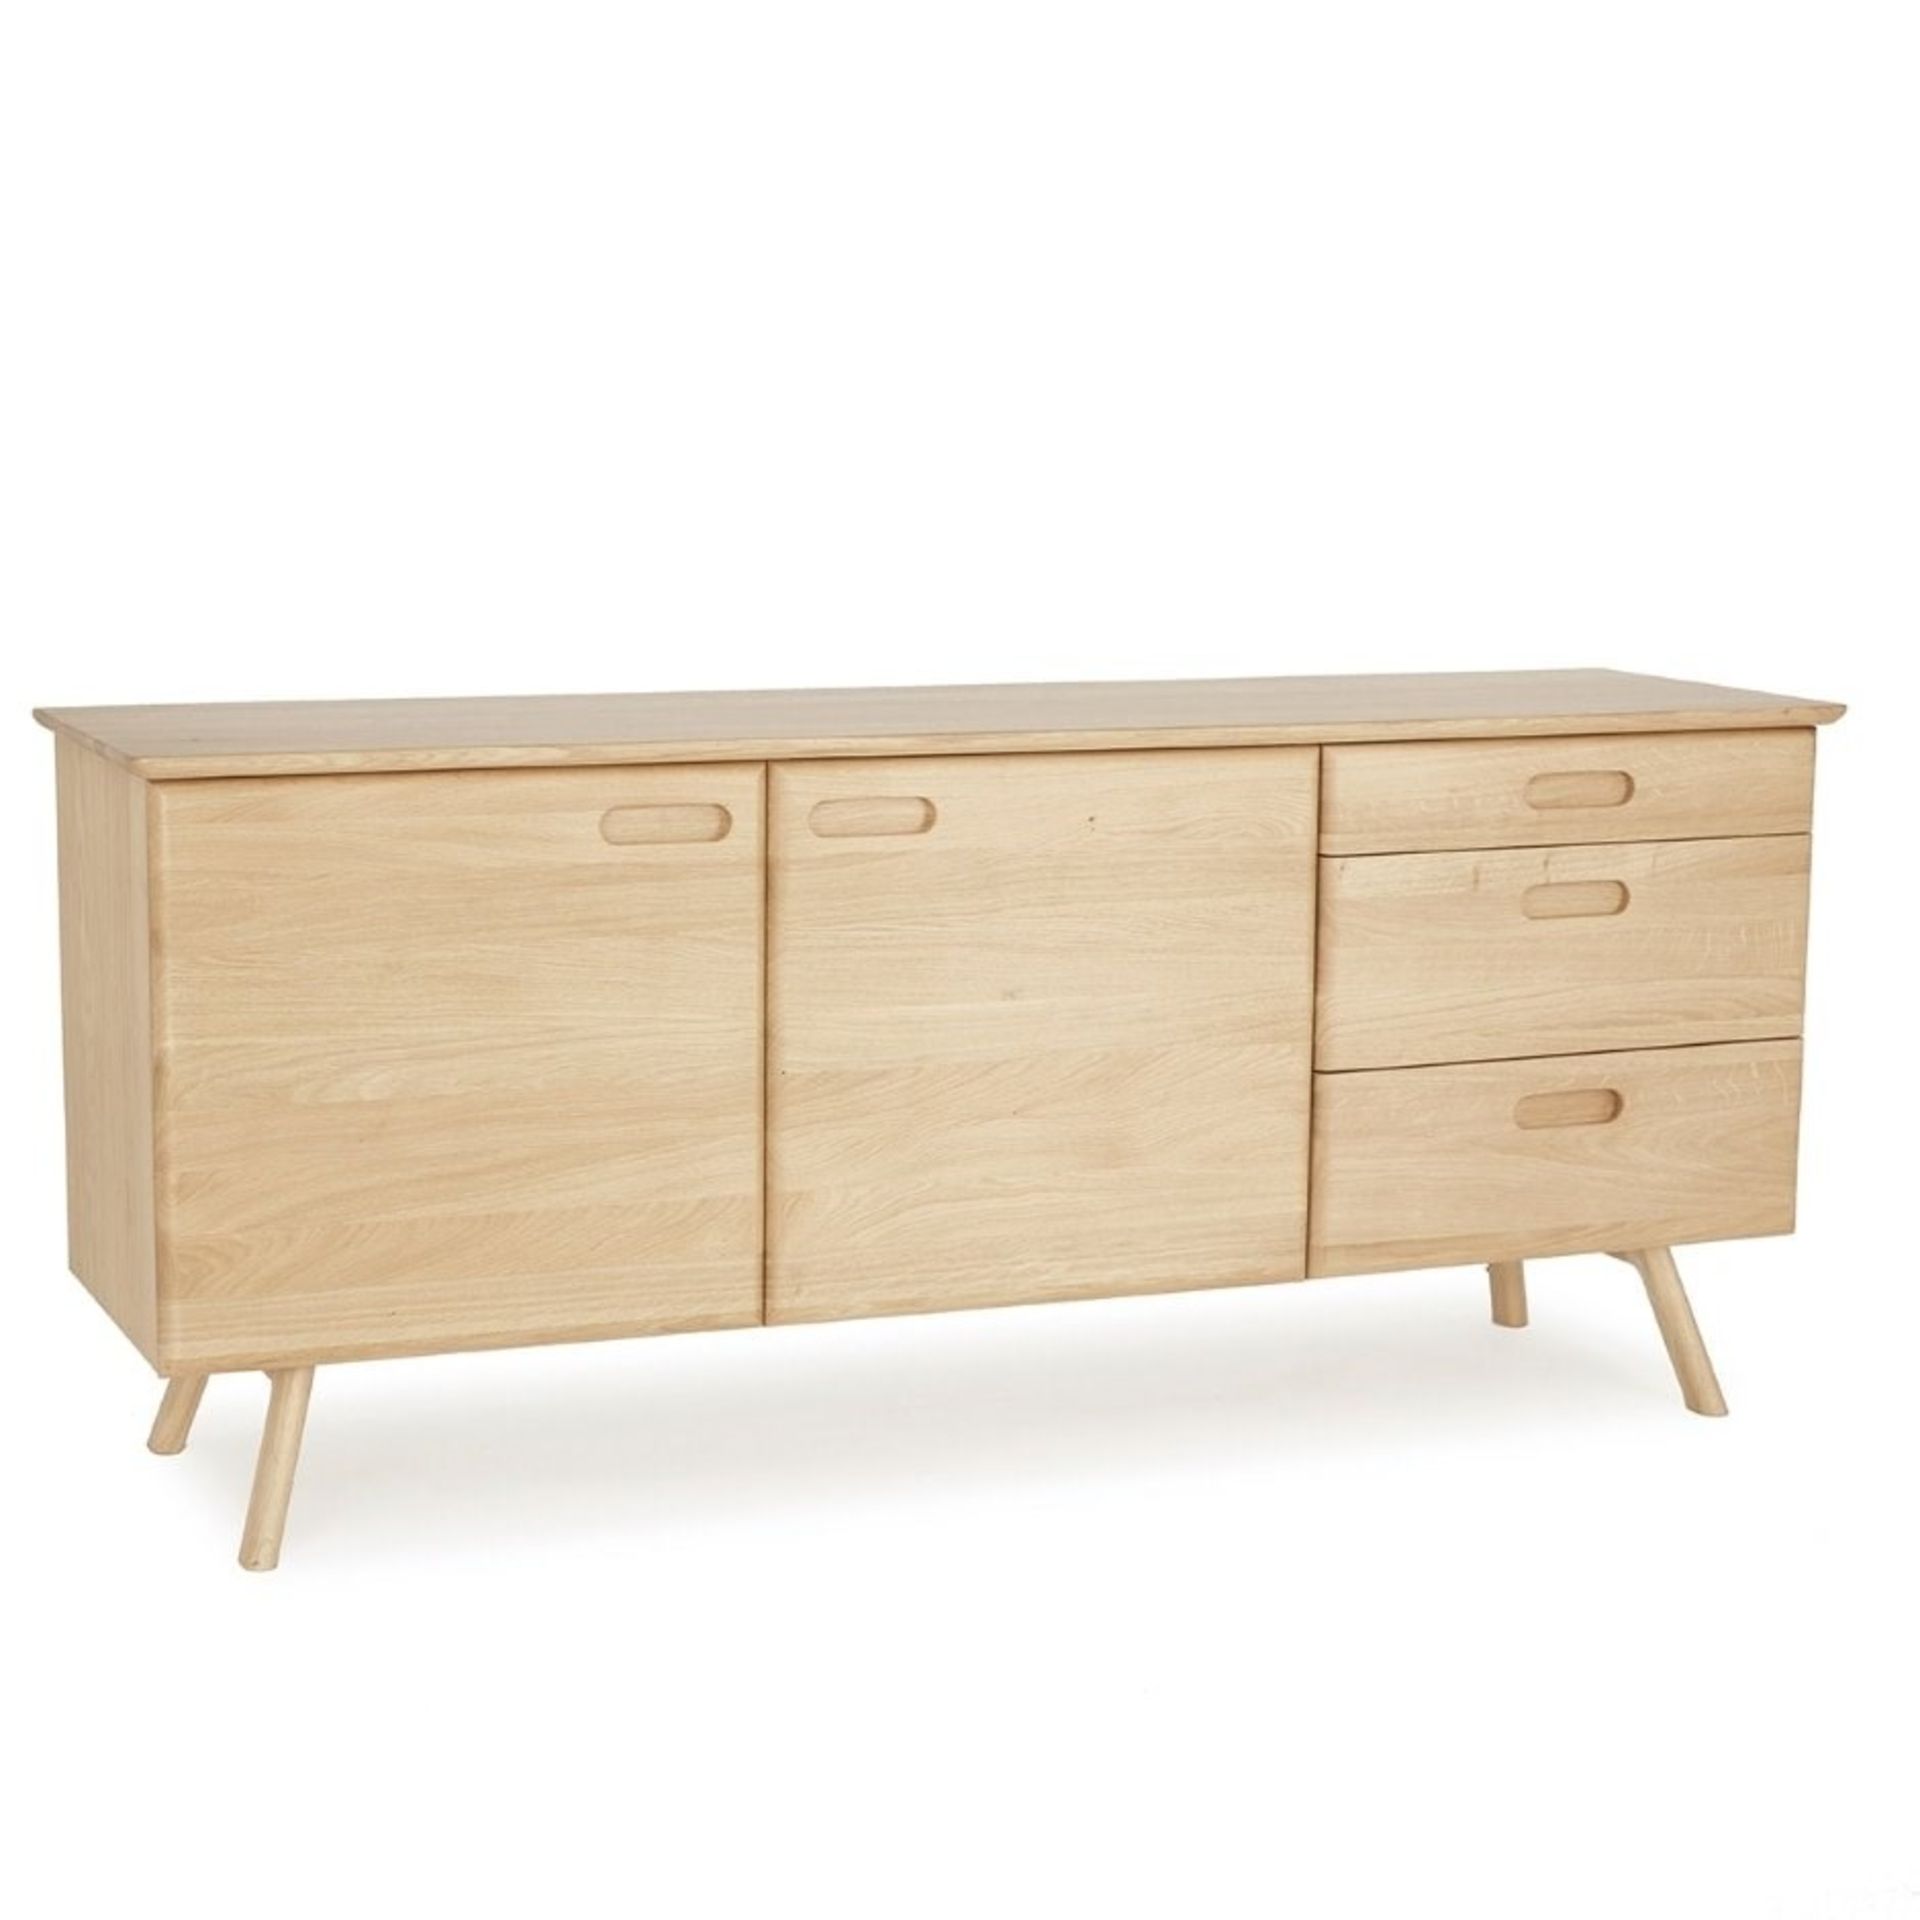 Laura Ashley Hazlemere 2 Door 3 Drawer Sideboard Taking Inspiration From The Iconic Furniture - Image 3 of 3